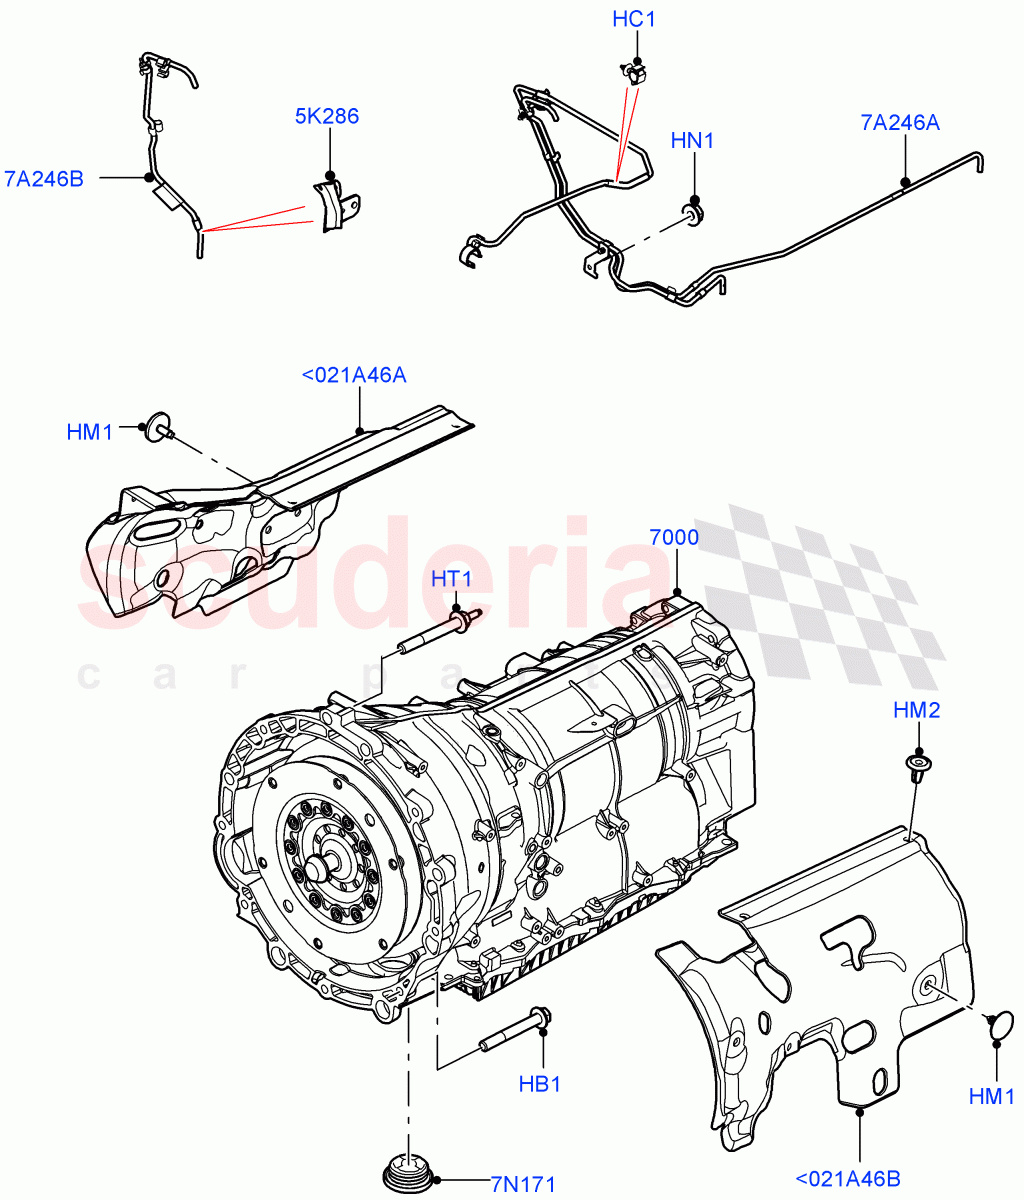 Auto Trans Assy & Speedometer Drive(3.0L AJ20D6 Diesel High,8 Speed Auto Trans ZF 8HP76)((V)FROMLA000001) of Land Rover Land Rover Range Rover (2012-2021) [4.4 DOHC Diesel V8 DITC]